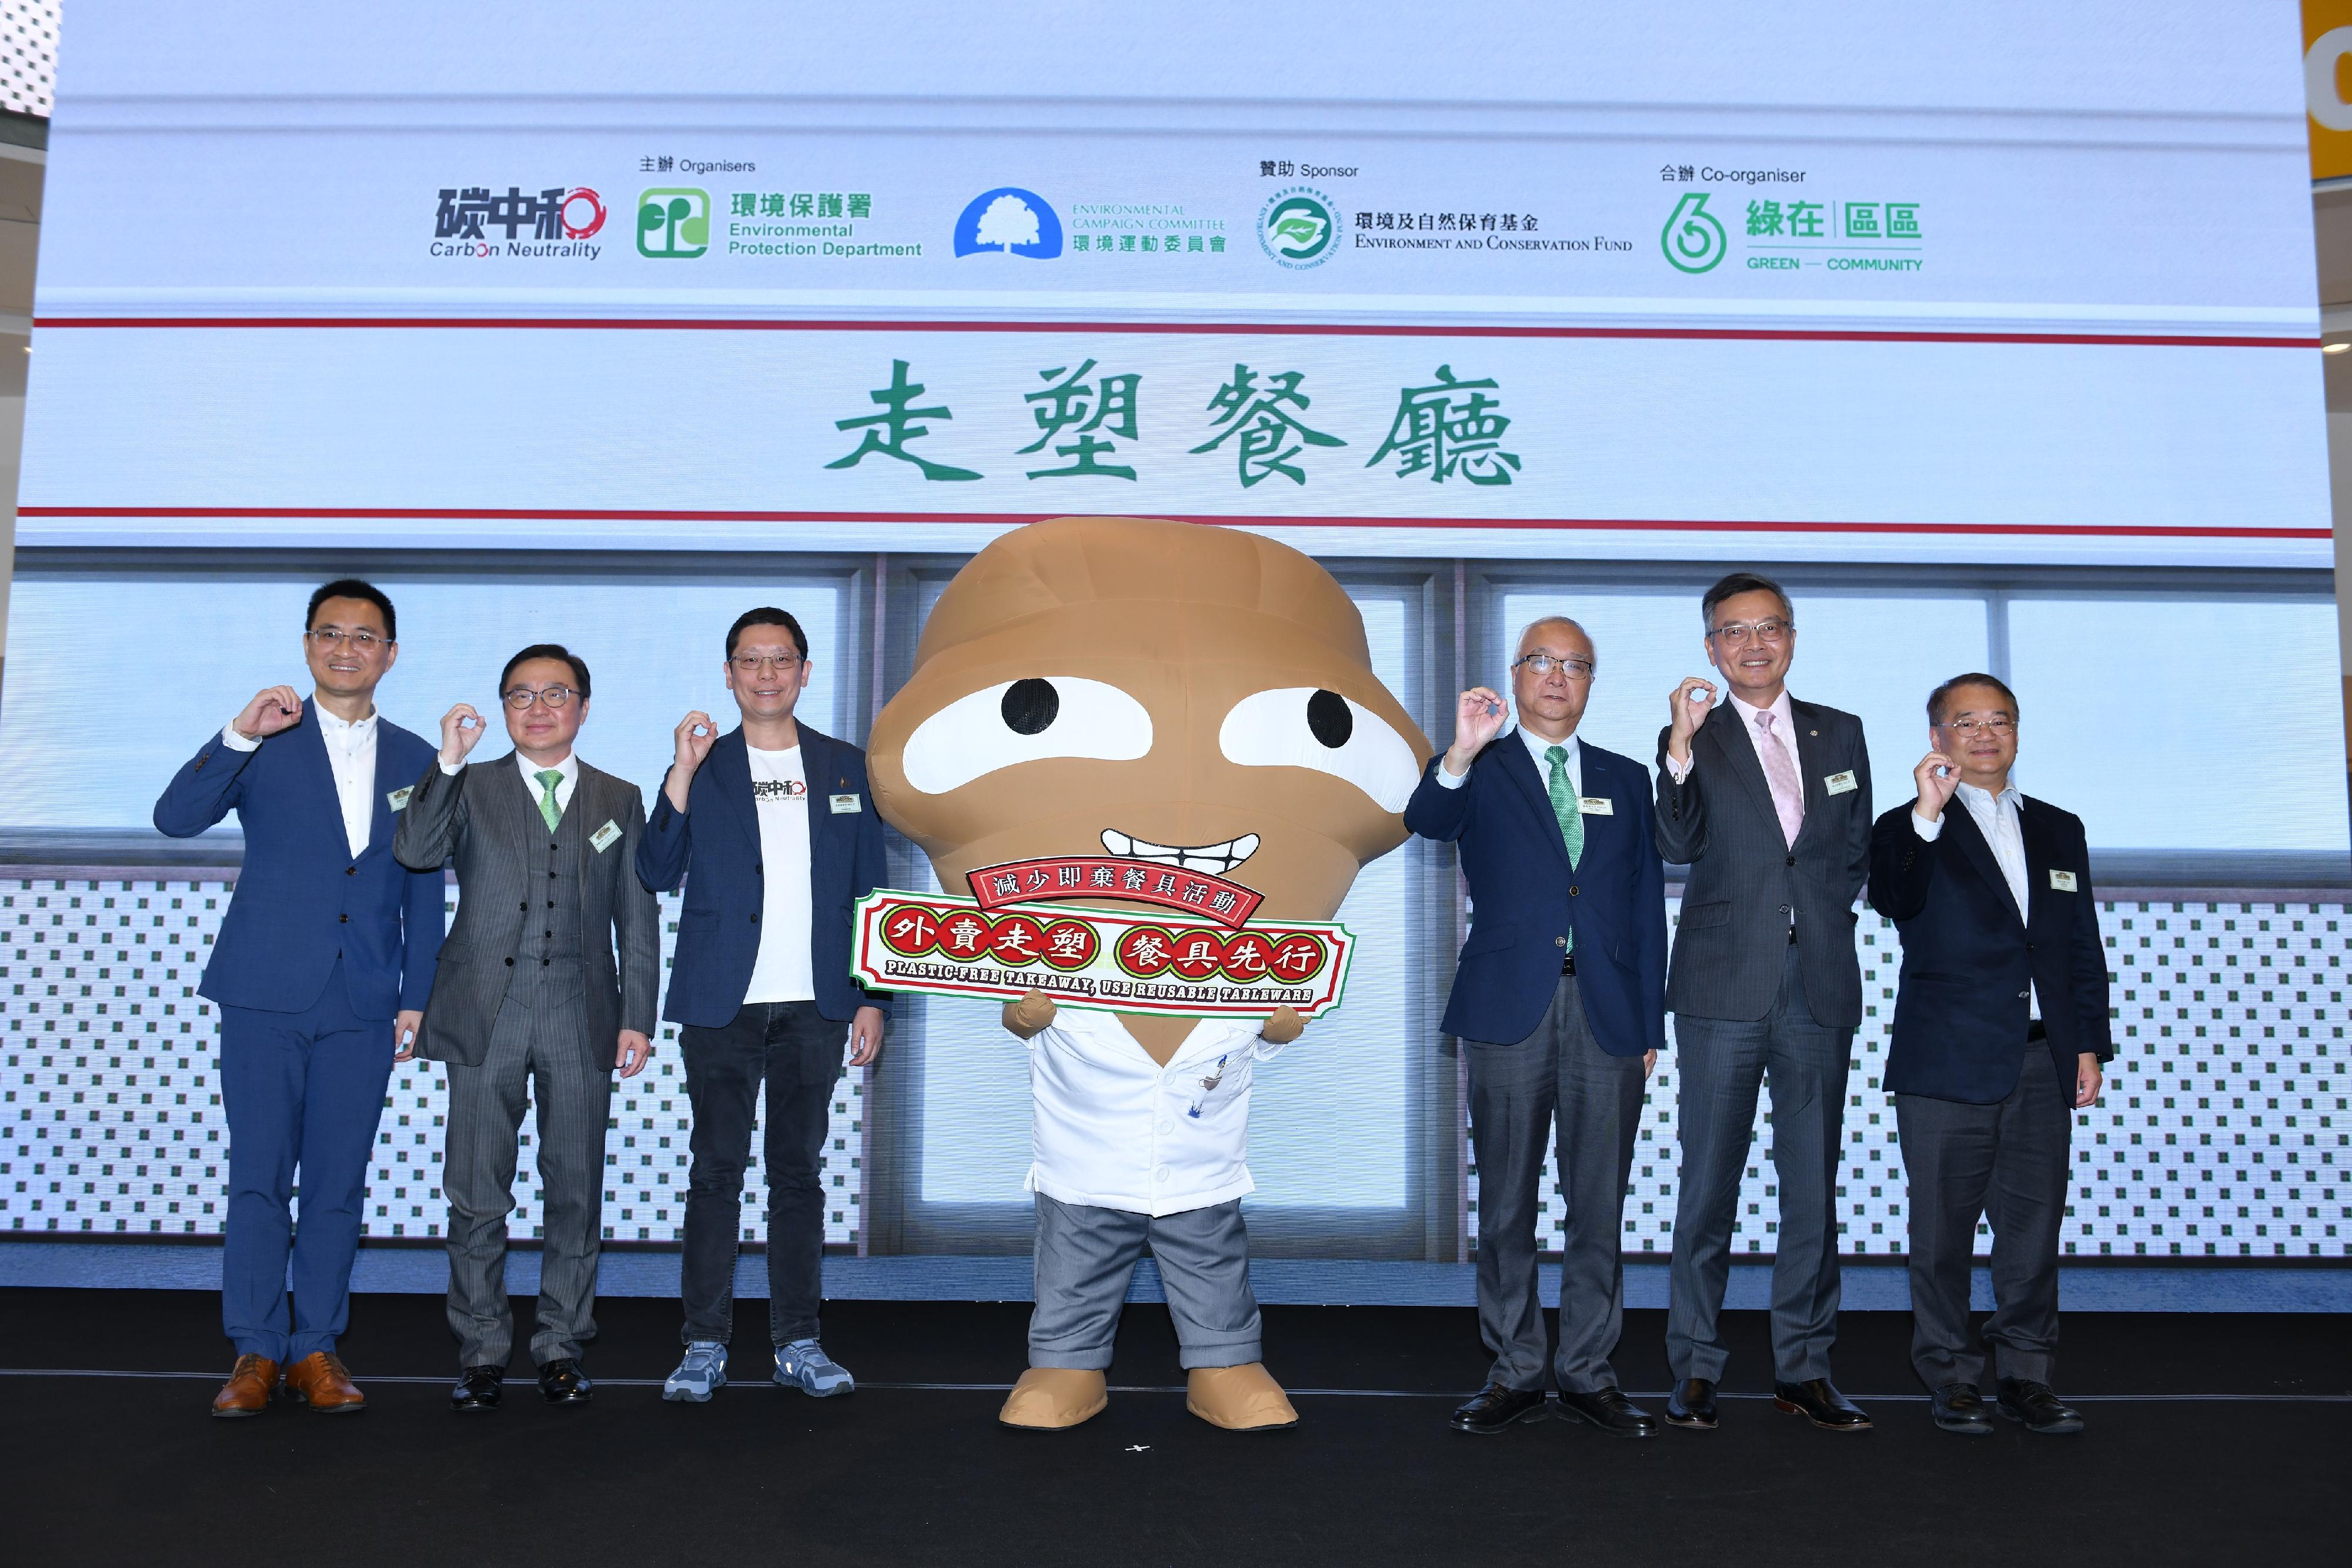 The Environmental Protection Department and the Environmental Campaign Committee (ECC) officially kicked off the third "Plastic-Free Takeaway, Use Reusable Tableware" campaign today (November 17). Photo shows the Secretary for Environment and Ecology, Mr Tse Chin-wan (third right); the Chairman of the ECC, Professor Simon Wong (third left); the Chairman of the Council for Carbon Neutrality and Sustainable Development, Dr Lam Ching-choi (second right); the Chairman of the Environment and Conservation Fund Committee, Dr Eric Cheng (second left); the Director of Environmental Protection, Dr Samuel Chui (first right); and the Commissioner for Climate Change, Environment and Ecology Bureau, Mr Wong Chuen-fai (first left), officiating at the launching ceremony.